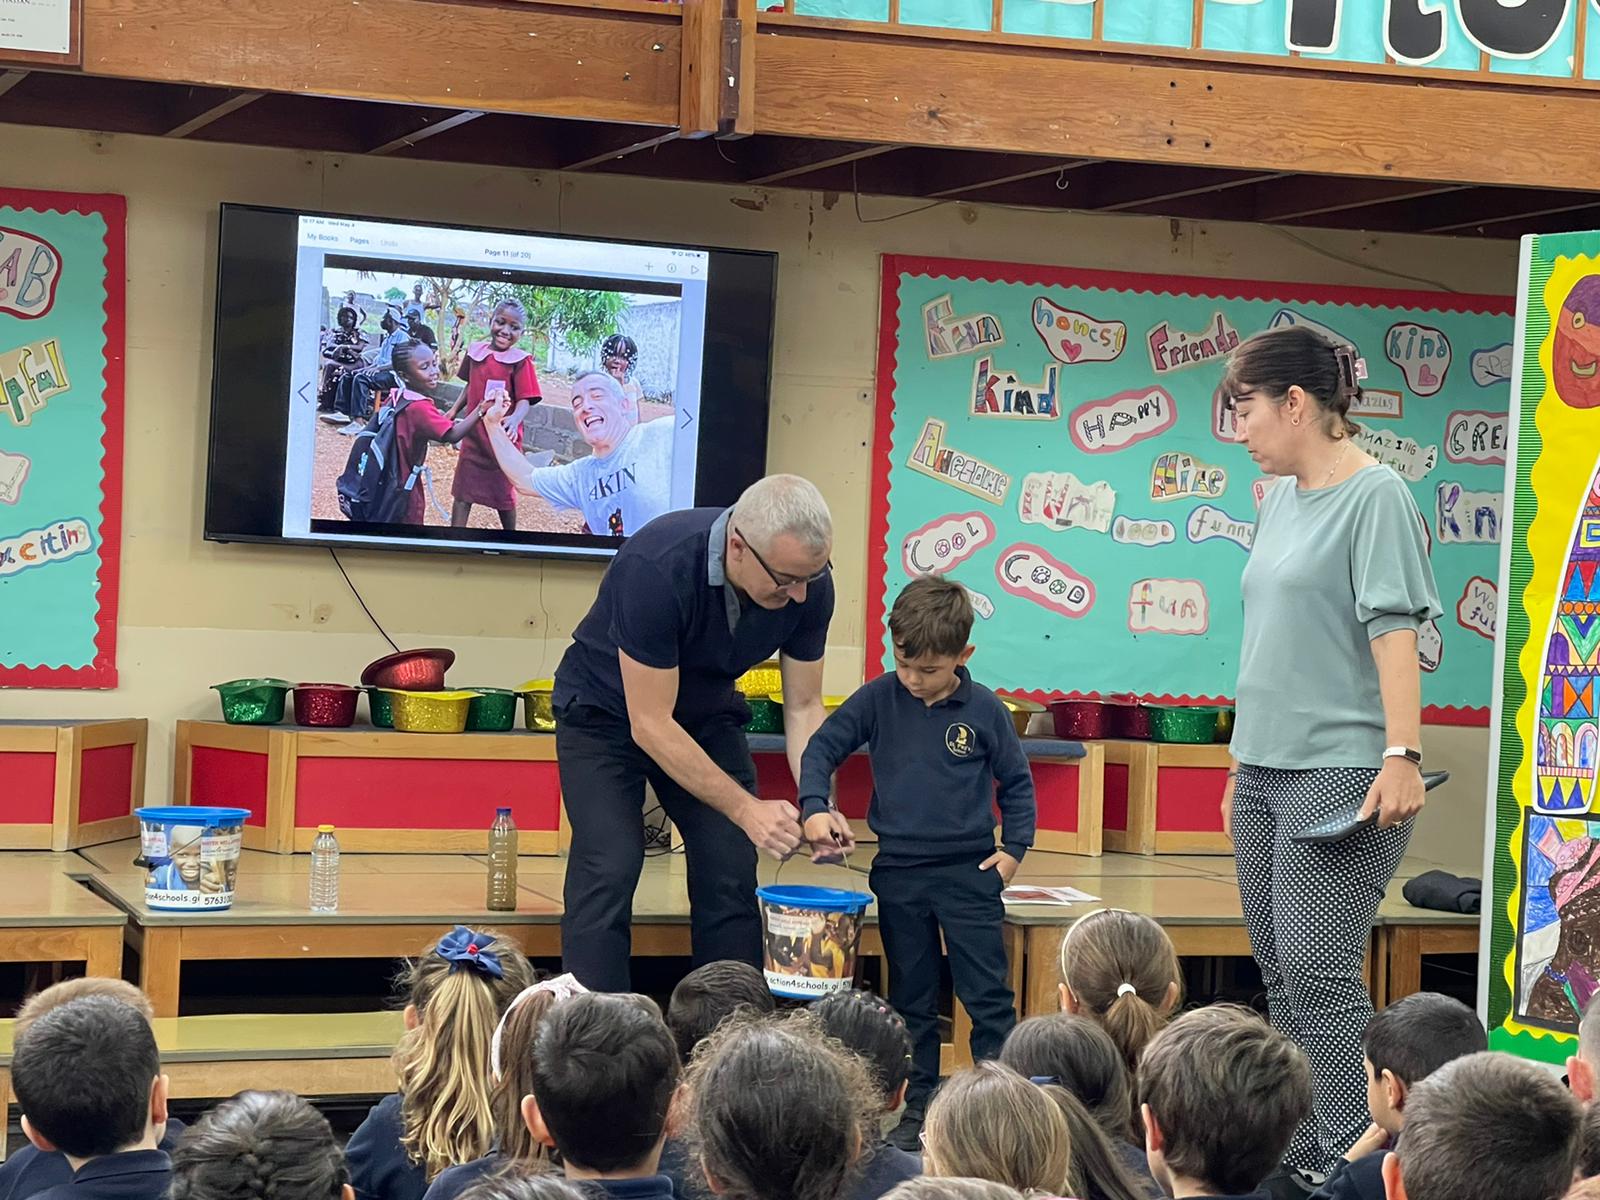 Children were shown how heavy buckets of water are to carry and we discussed the importance of having clean, safe water close to schools in Sierra Leone and the effects of not having access to such a basic need.